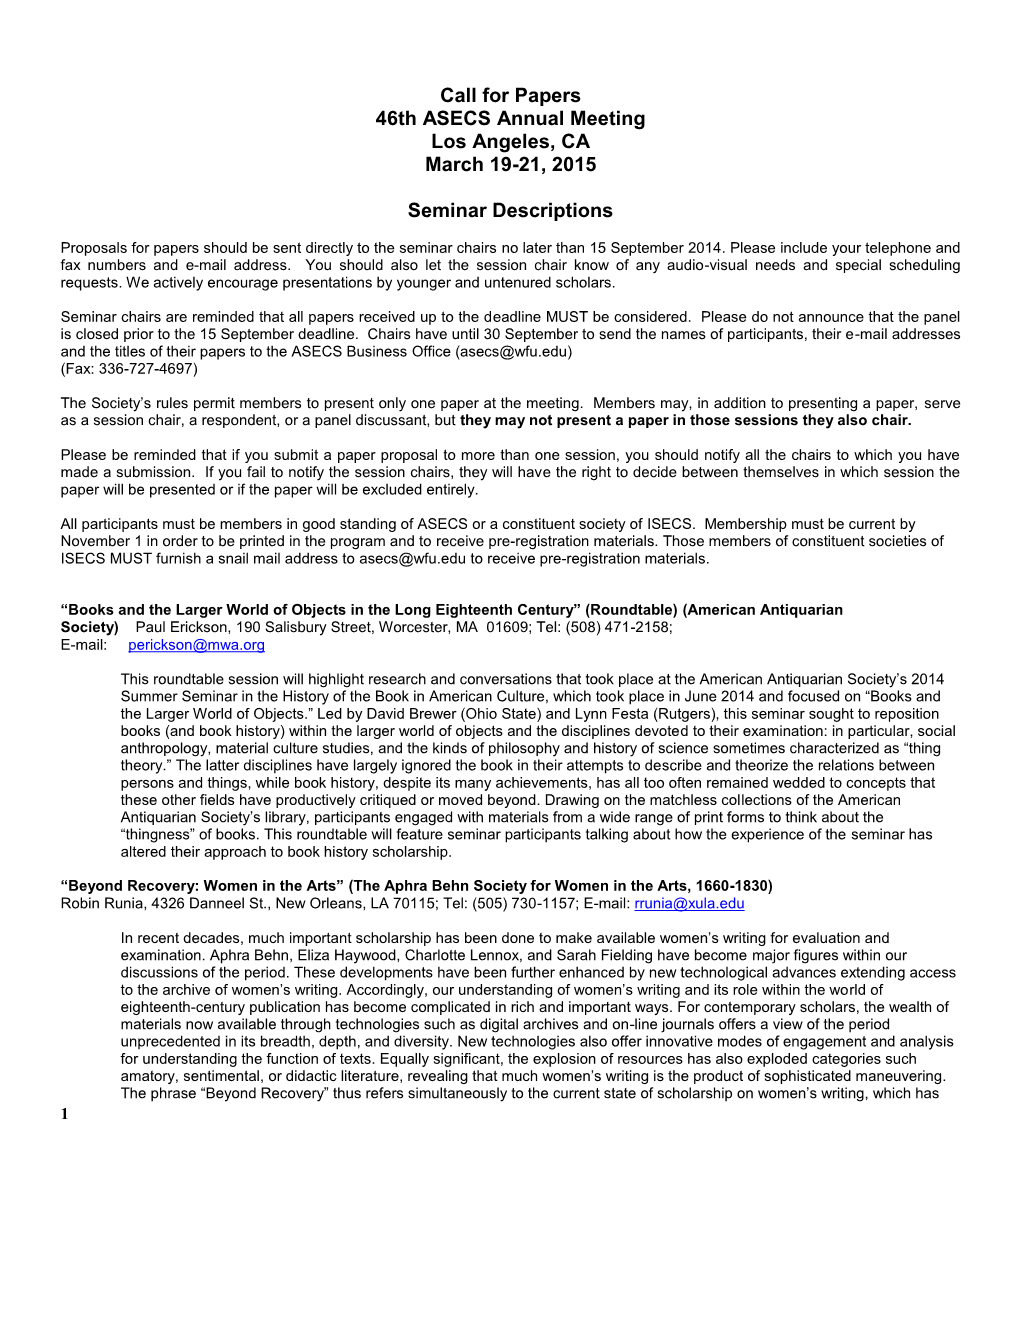 Call for Papers 46Th ASECS Annual Meeting Los Angeles, CA March 19-21, 2015